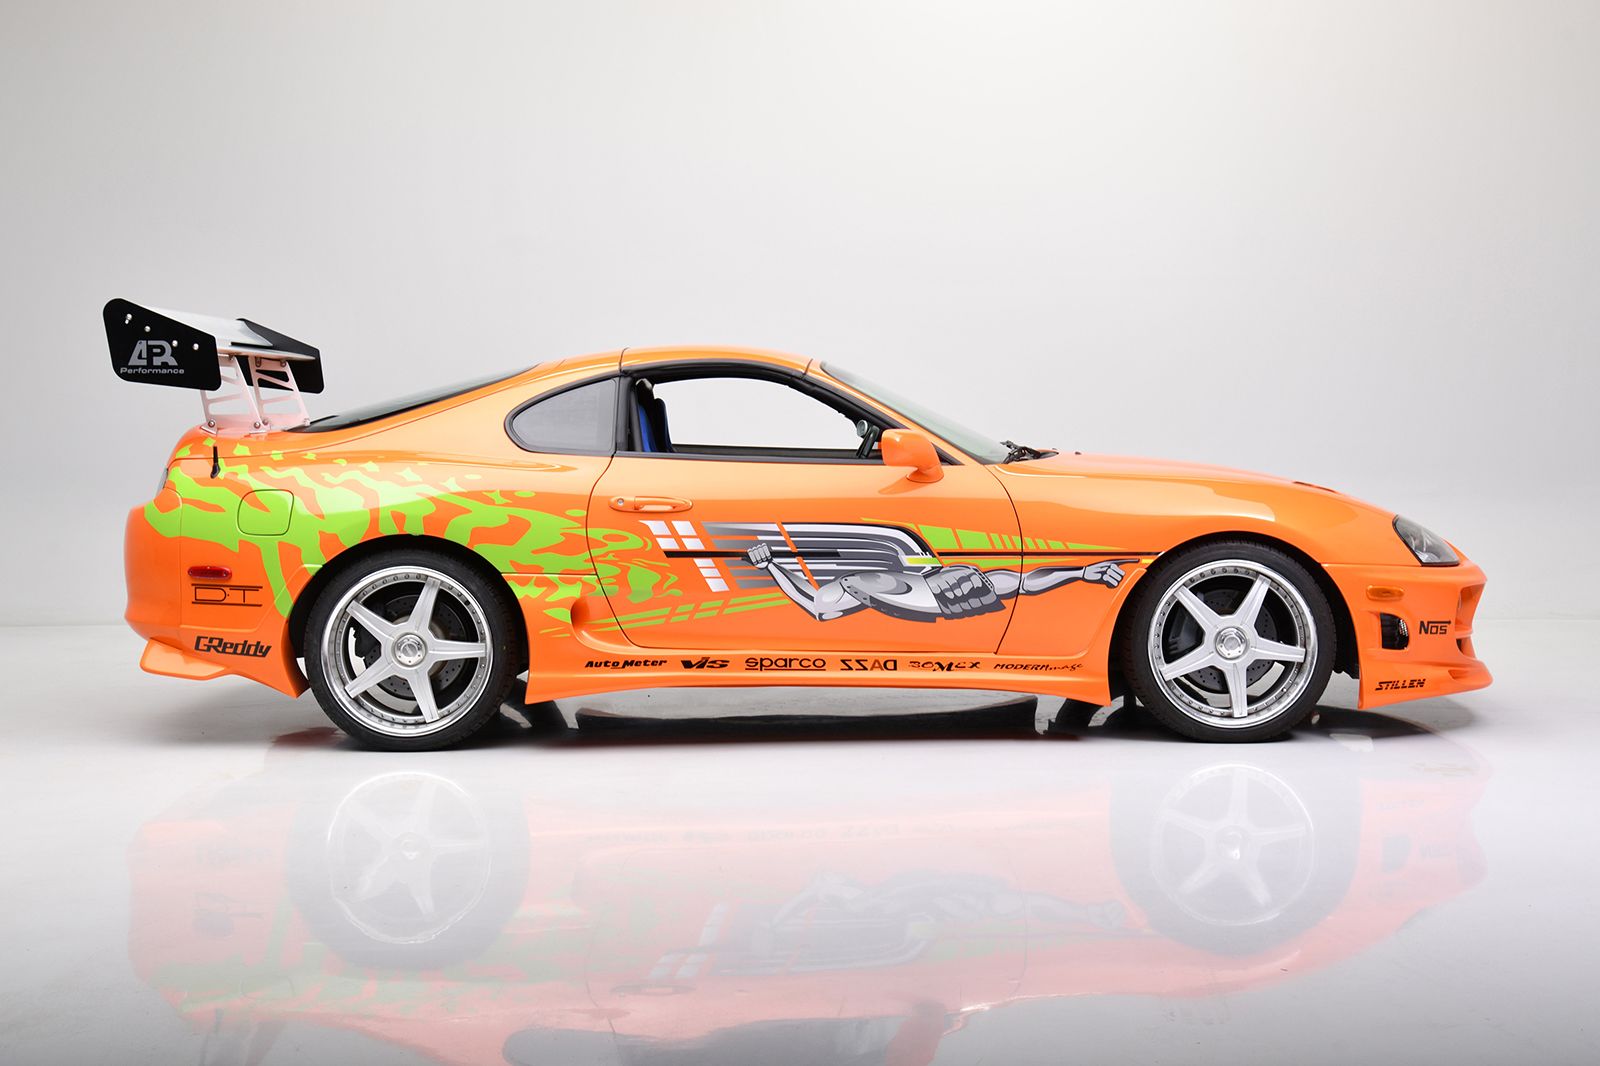 Paul Walker's Toyota Supra in 'The Fast and the Furious' up for